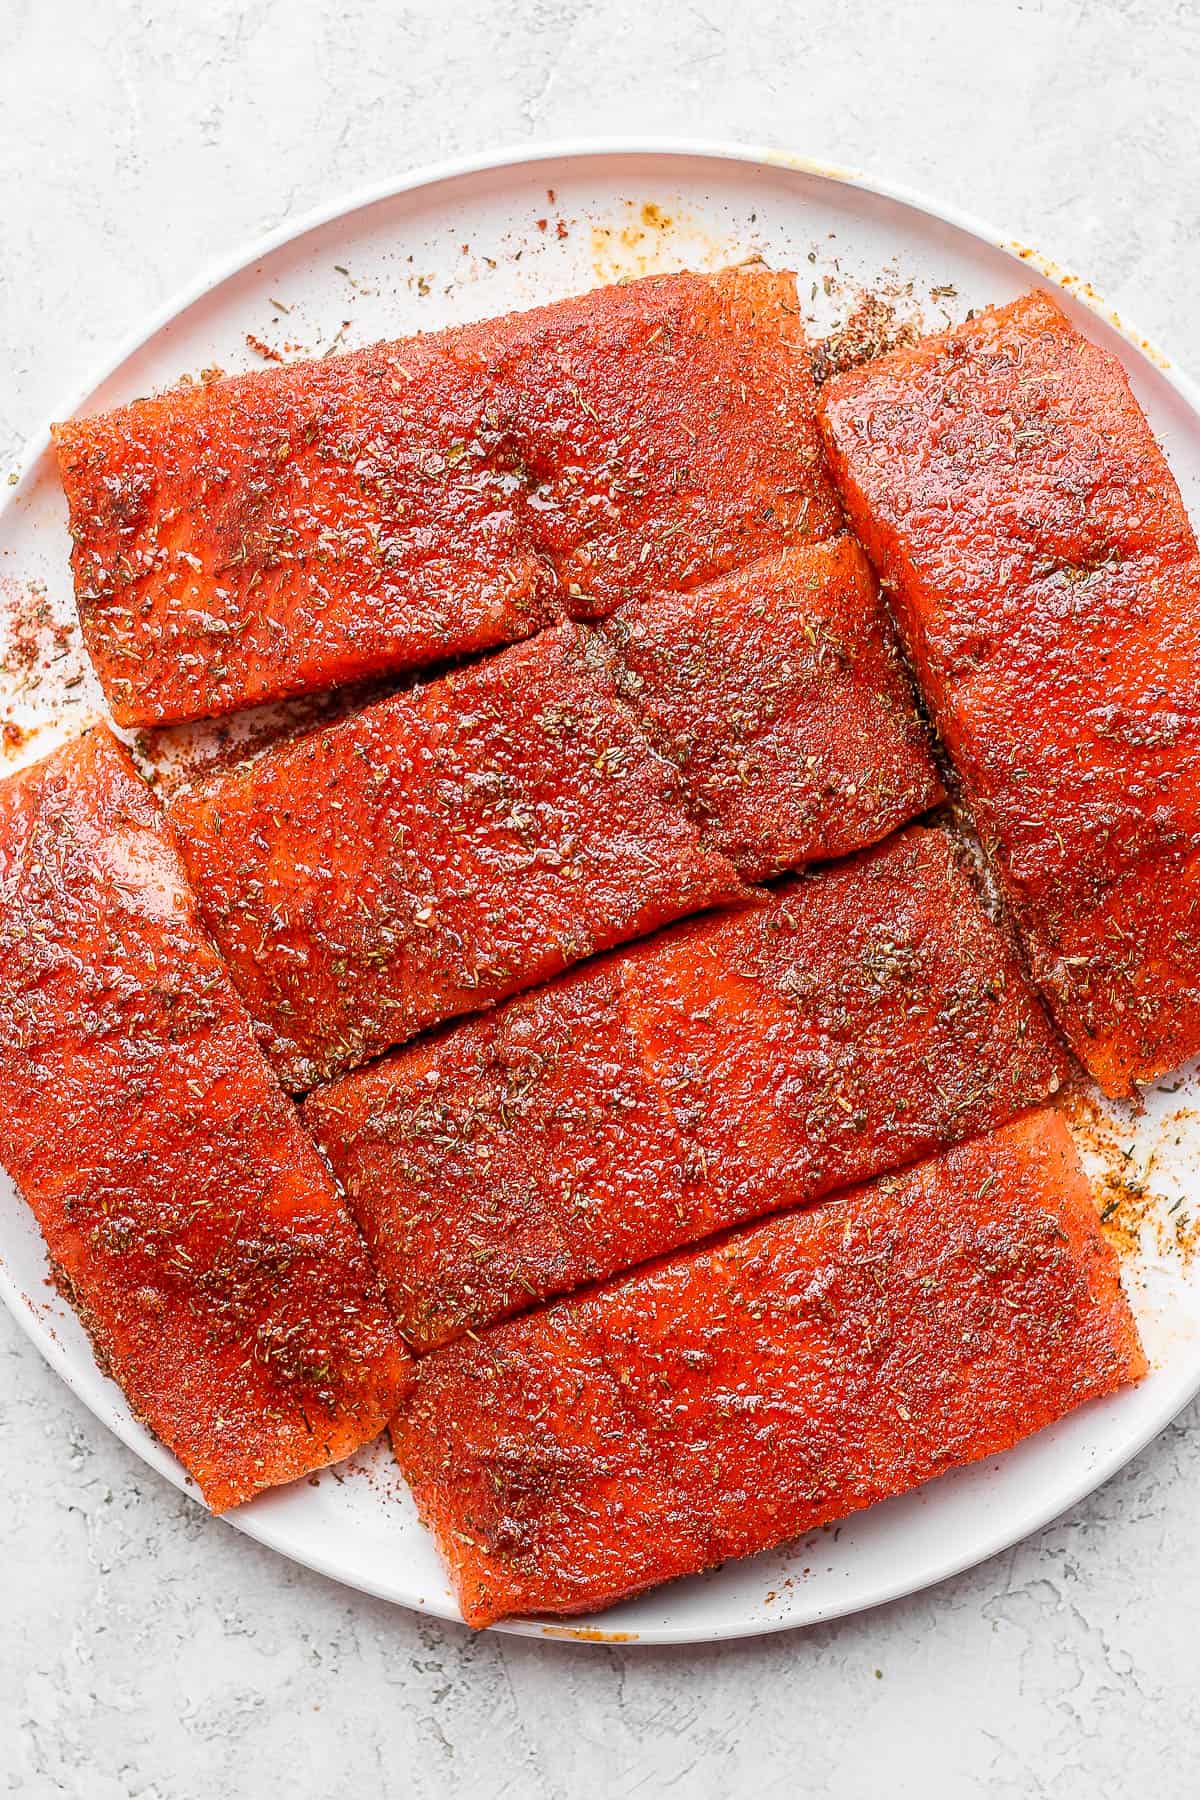 Salmon fillets covered in seasoning and olive oil.